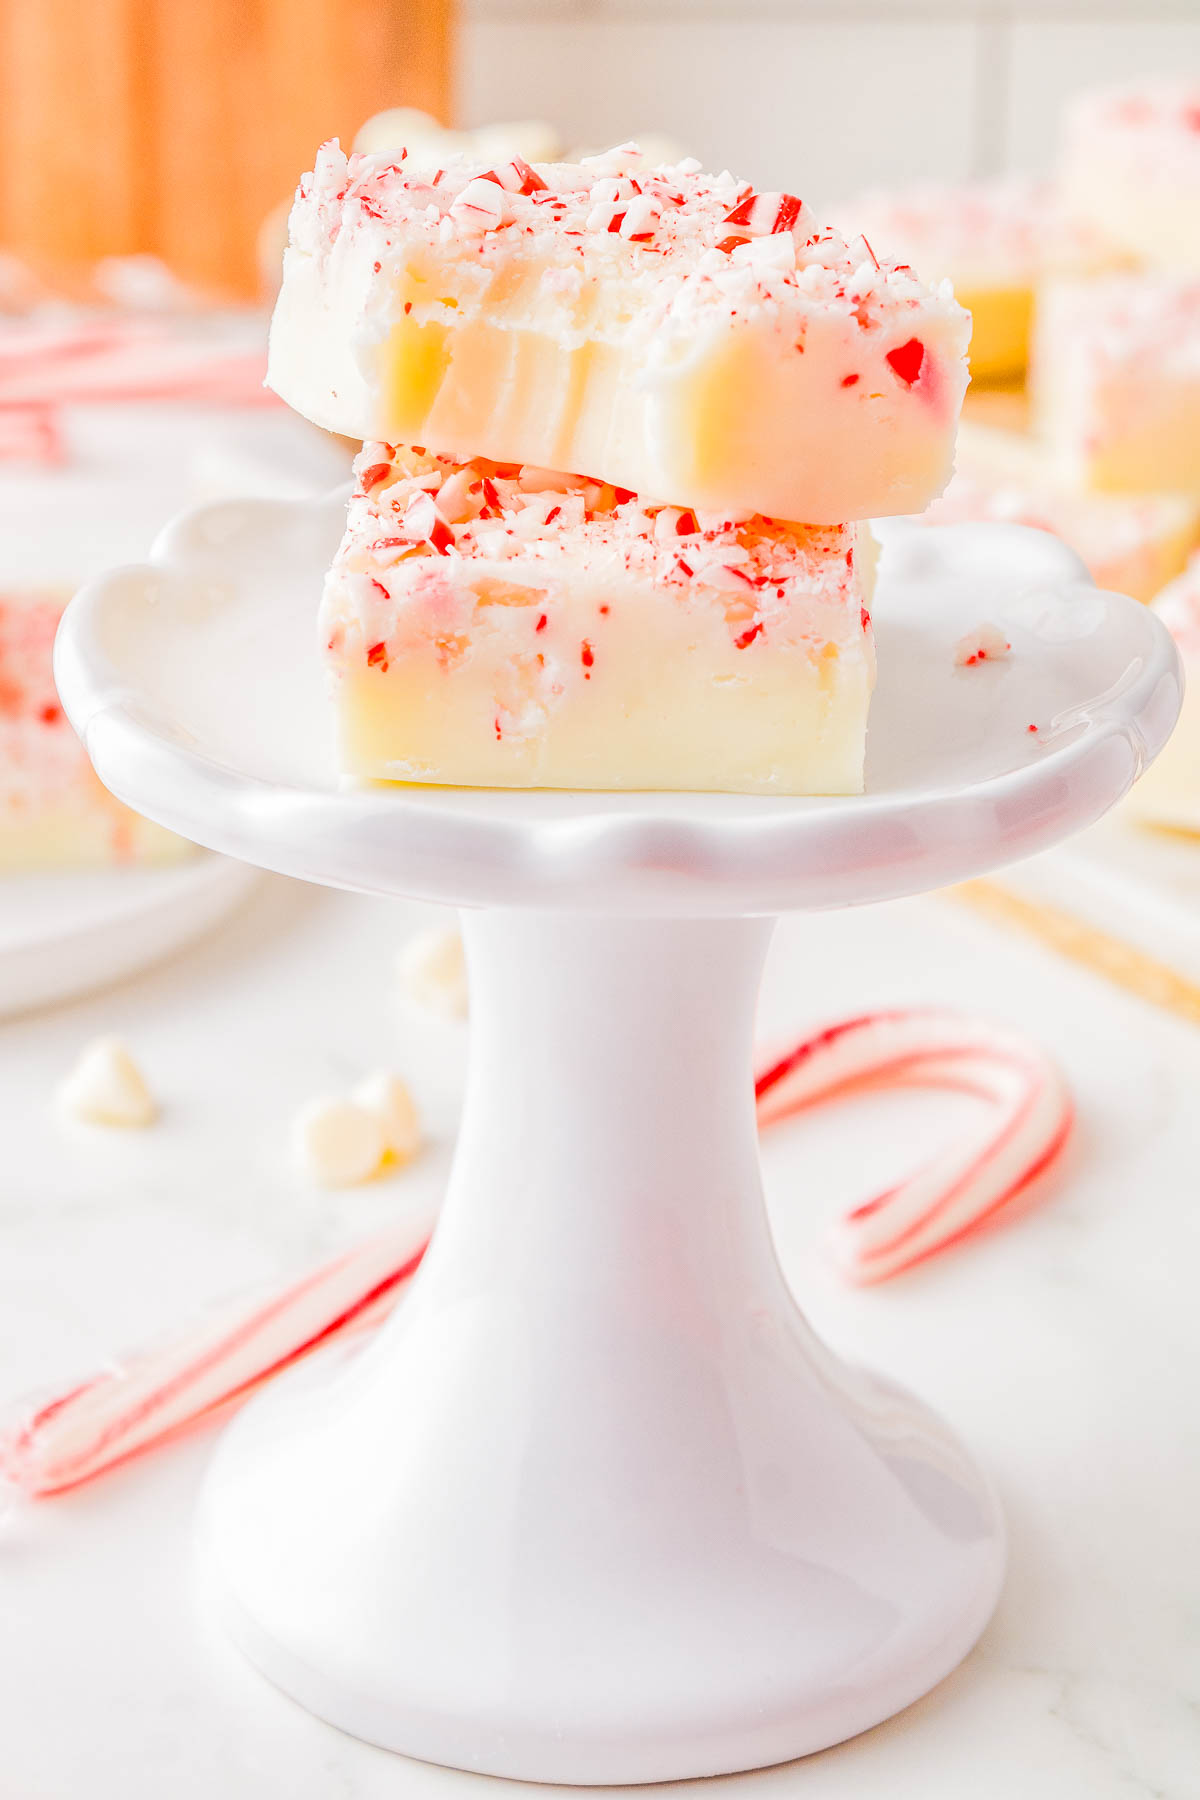 White Chocolate Peppermint Fudge - A FOOLPROOF recipe for fudge with no boiling, no candy thermometers, and it turns out PERFECTLY every time! This EASY recipe uses just 4 INGREDIENTS, can be made ahead of time, and is great for holiday entertaining! It's creamy and rich with a peppermint crunch, making it a wonderfully festive treat!